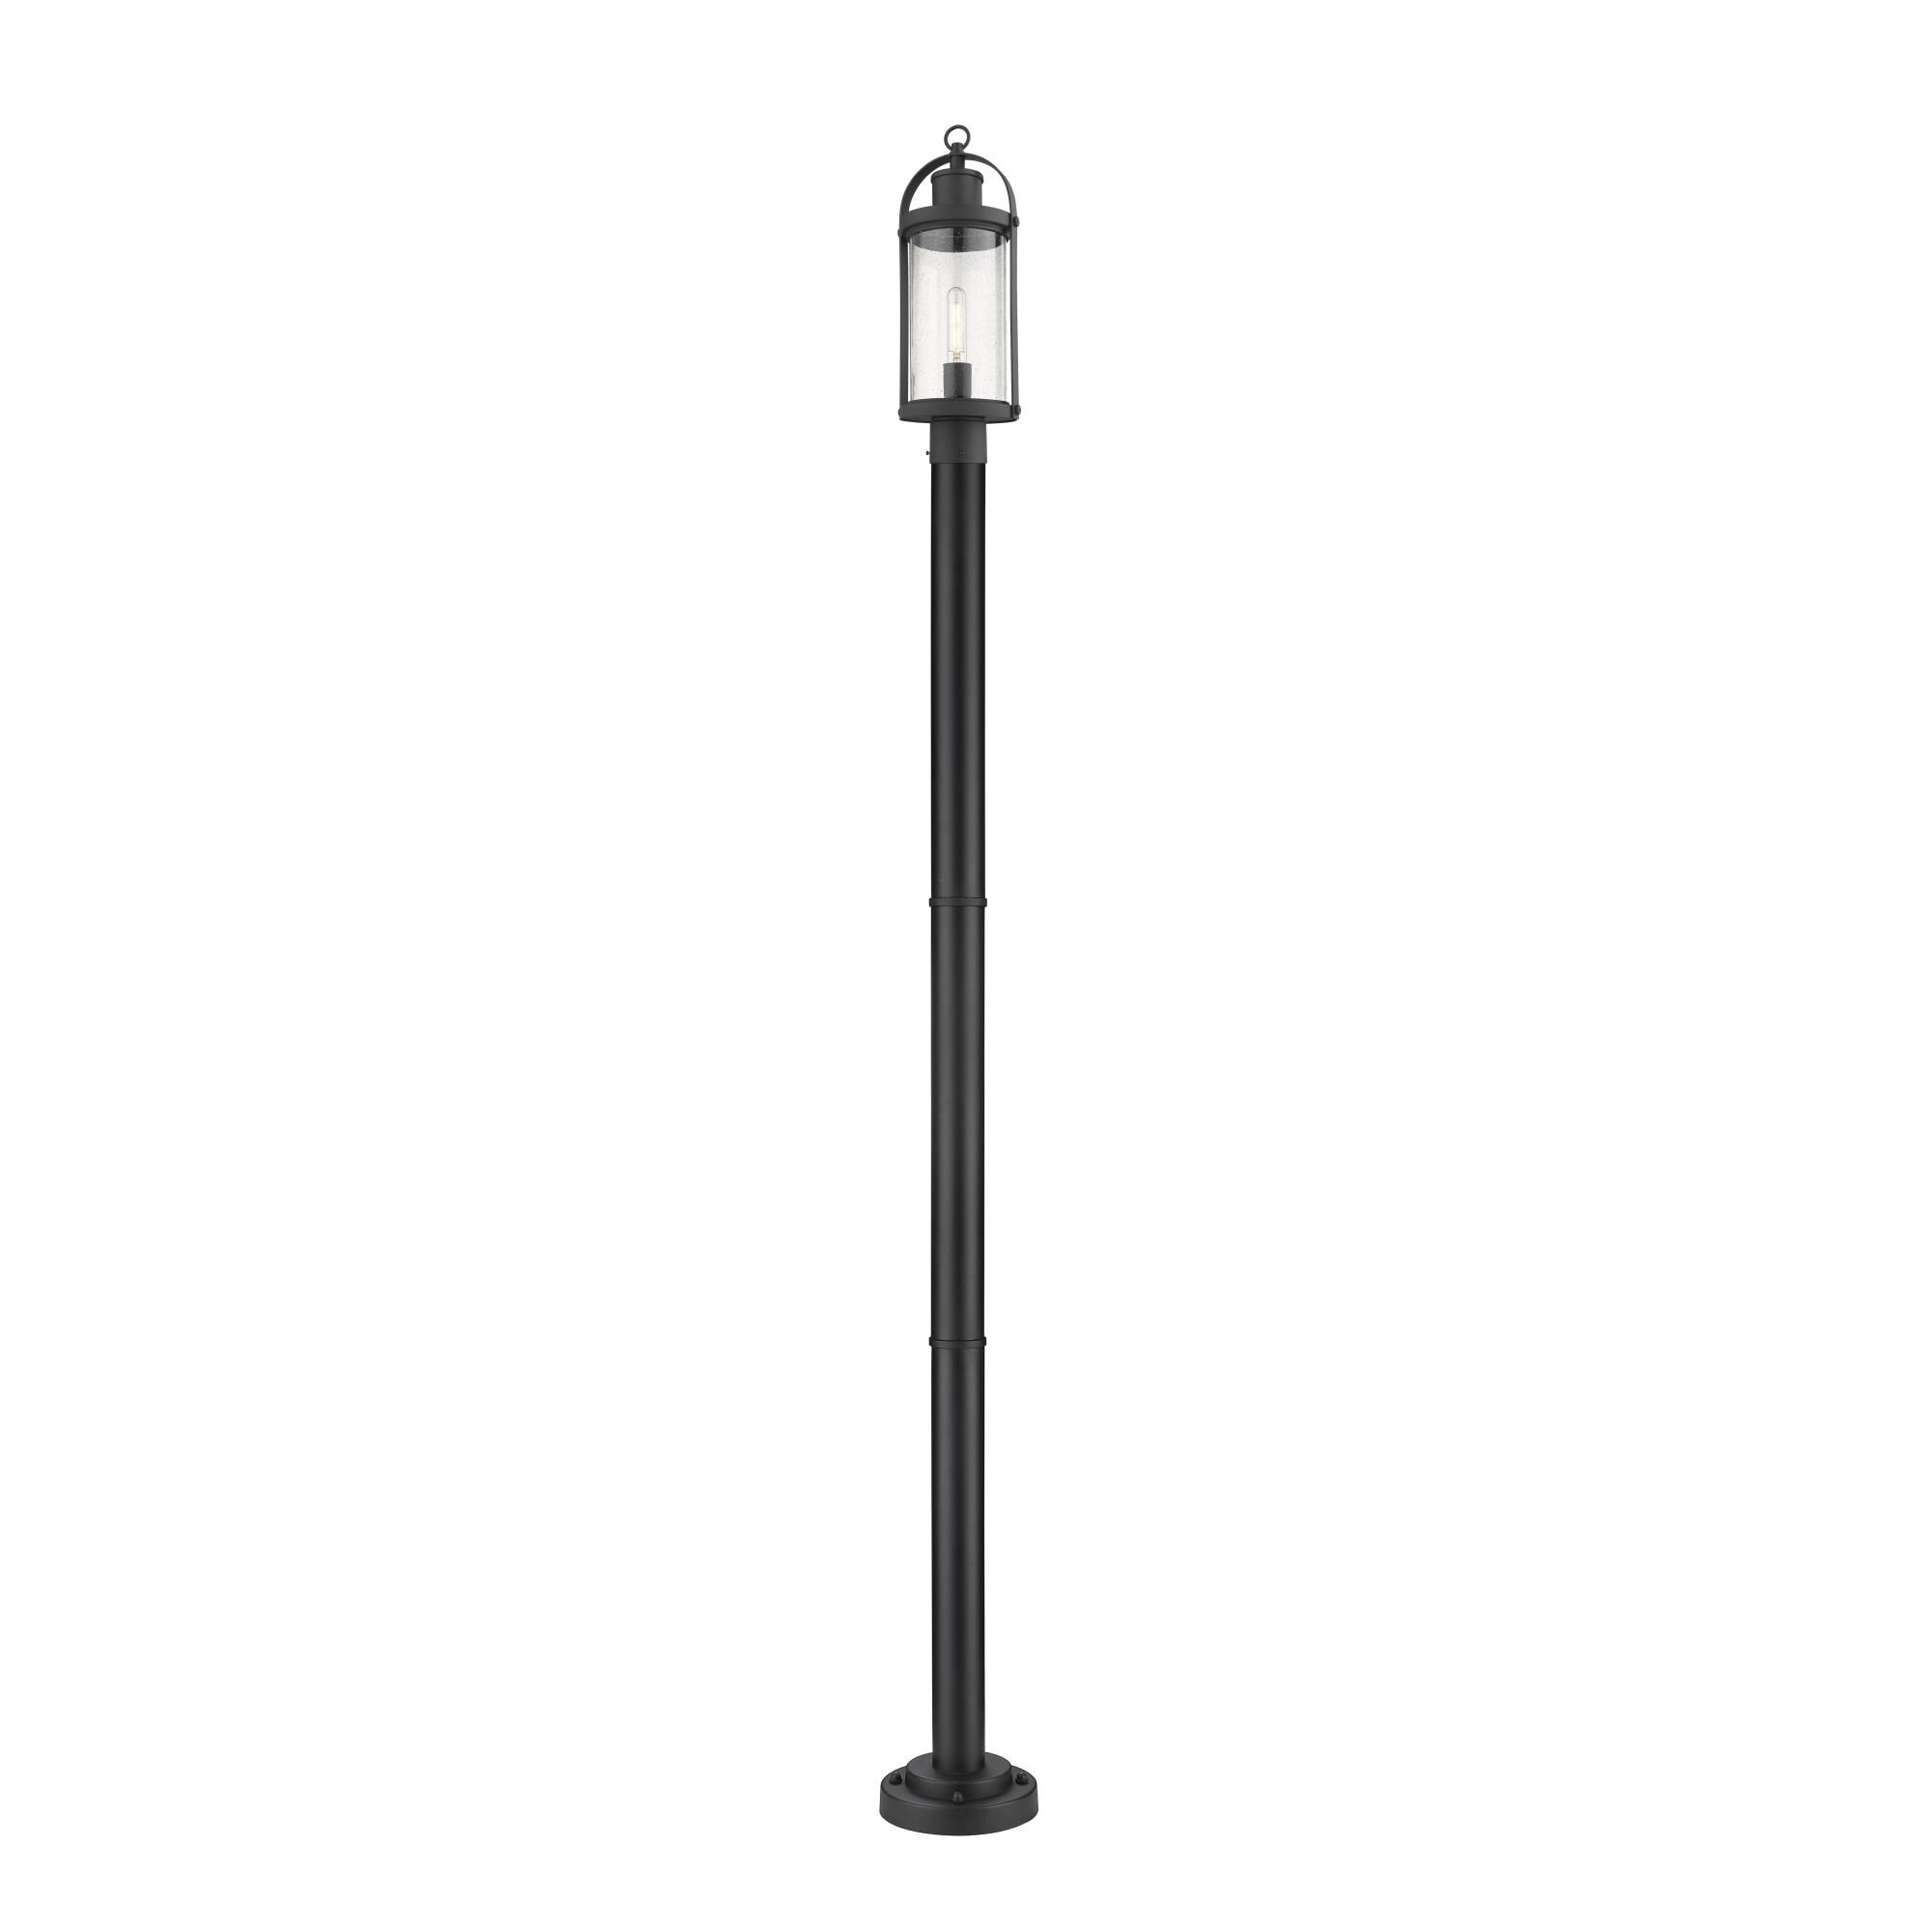 Photos - Floodlight / Garden Lamps Z-Lite Roundhouse 94 Inch Tall Outdoor Post Lamp Roundhouse - 569PHM-567P